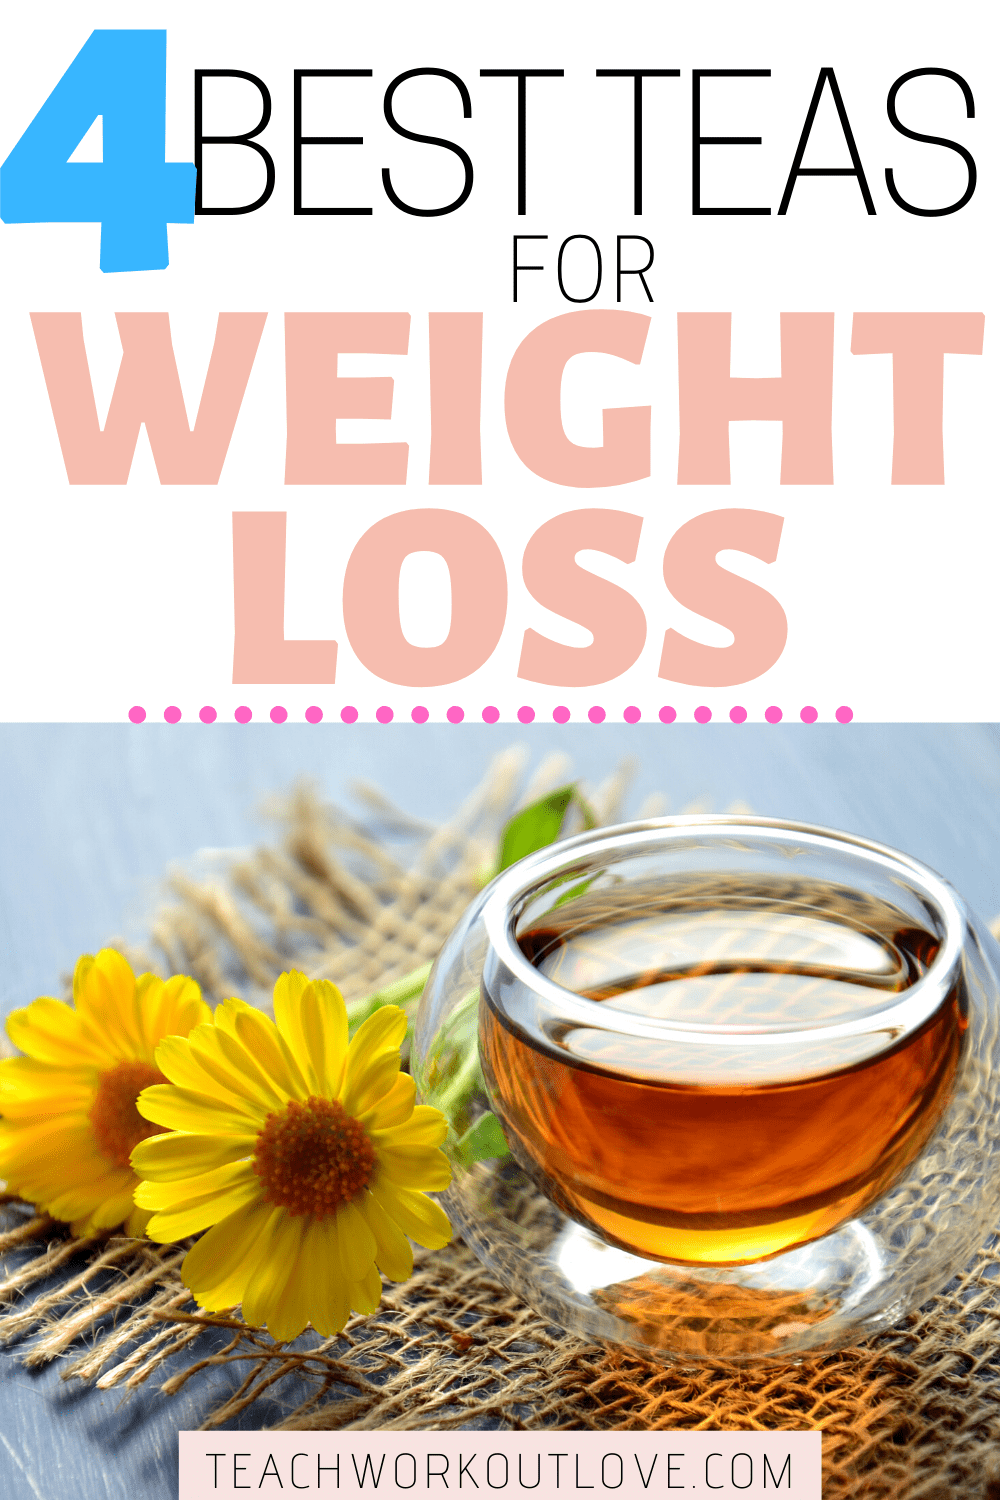 Tea can help you reach your weight loss goals sooner and in a natural way. Read on for the best teas for weight loss and fat burning.